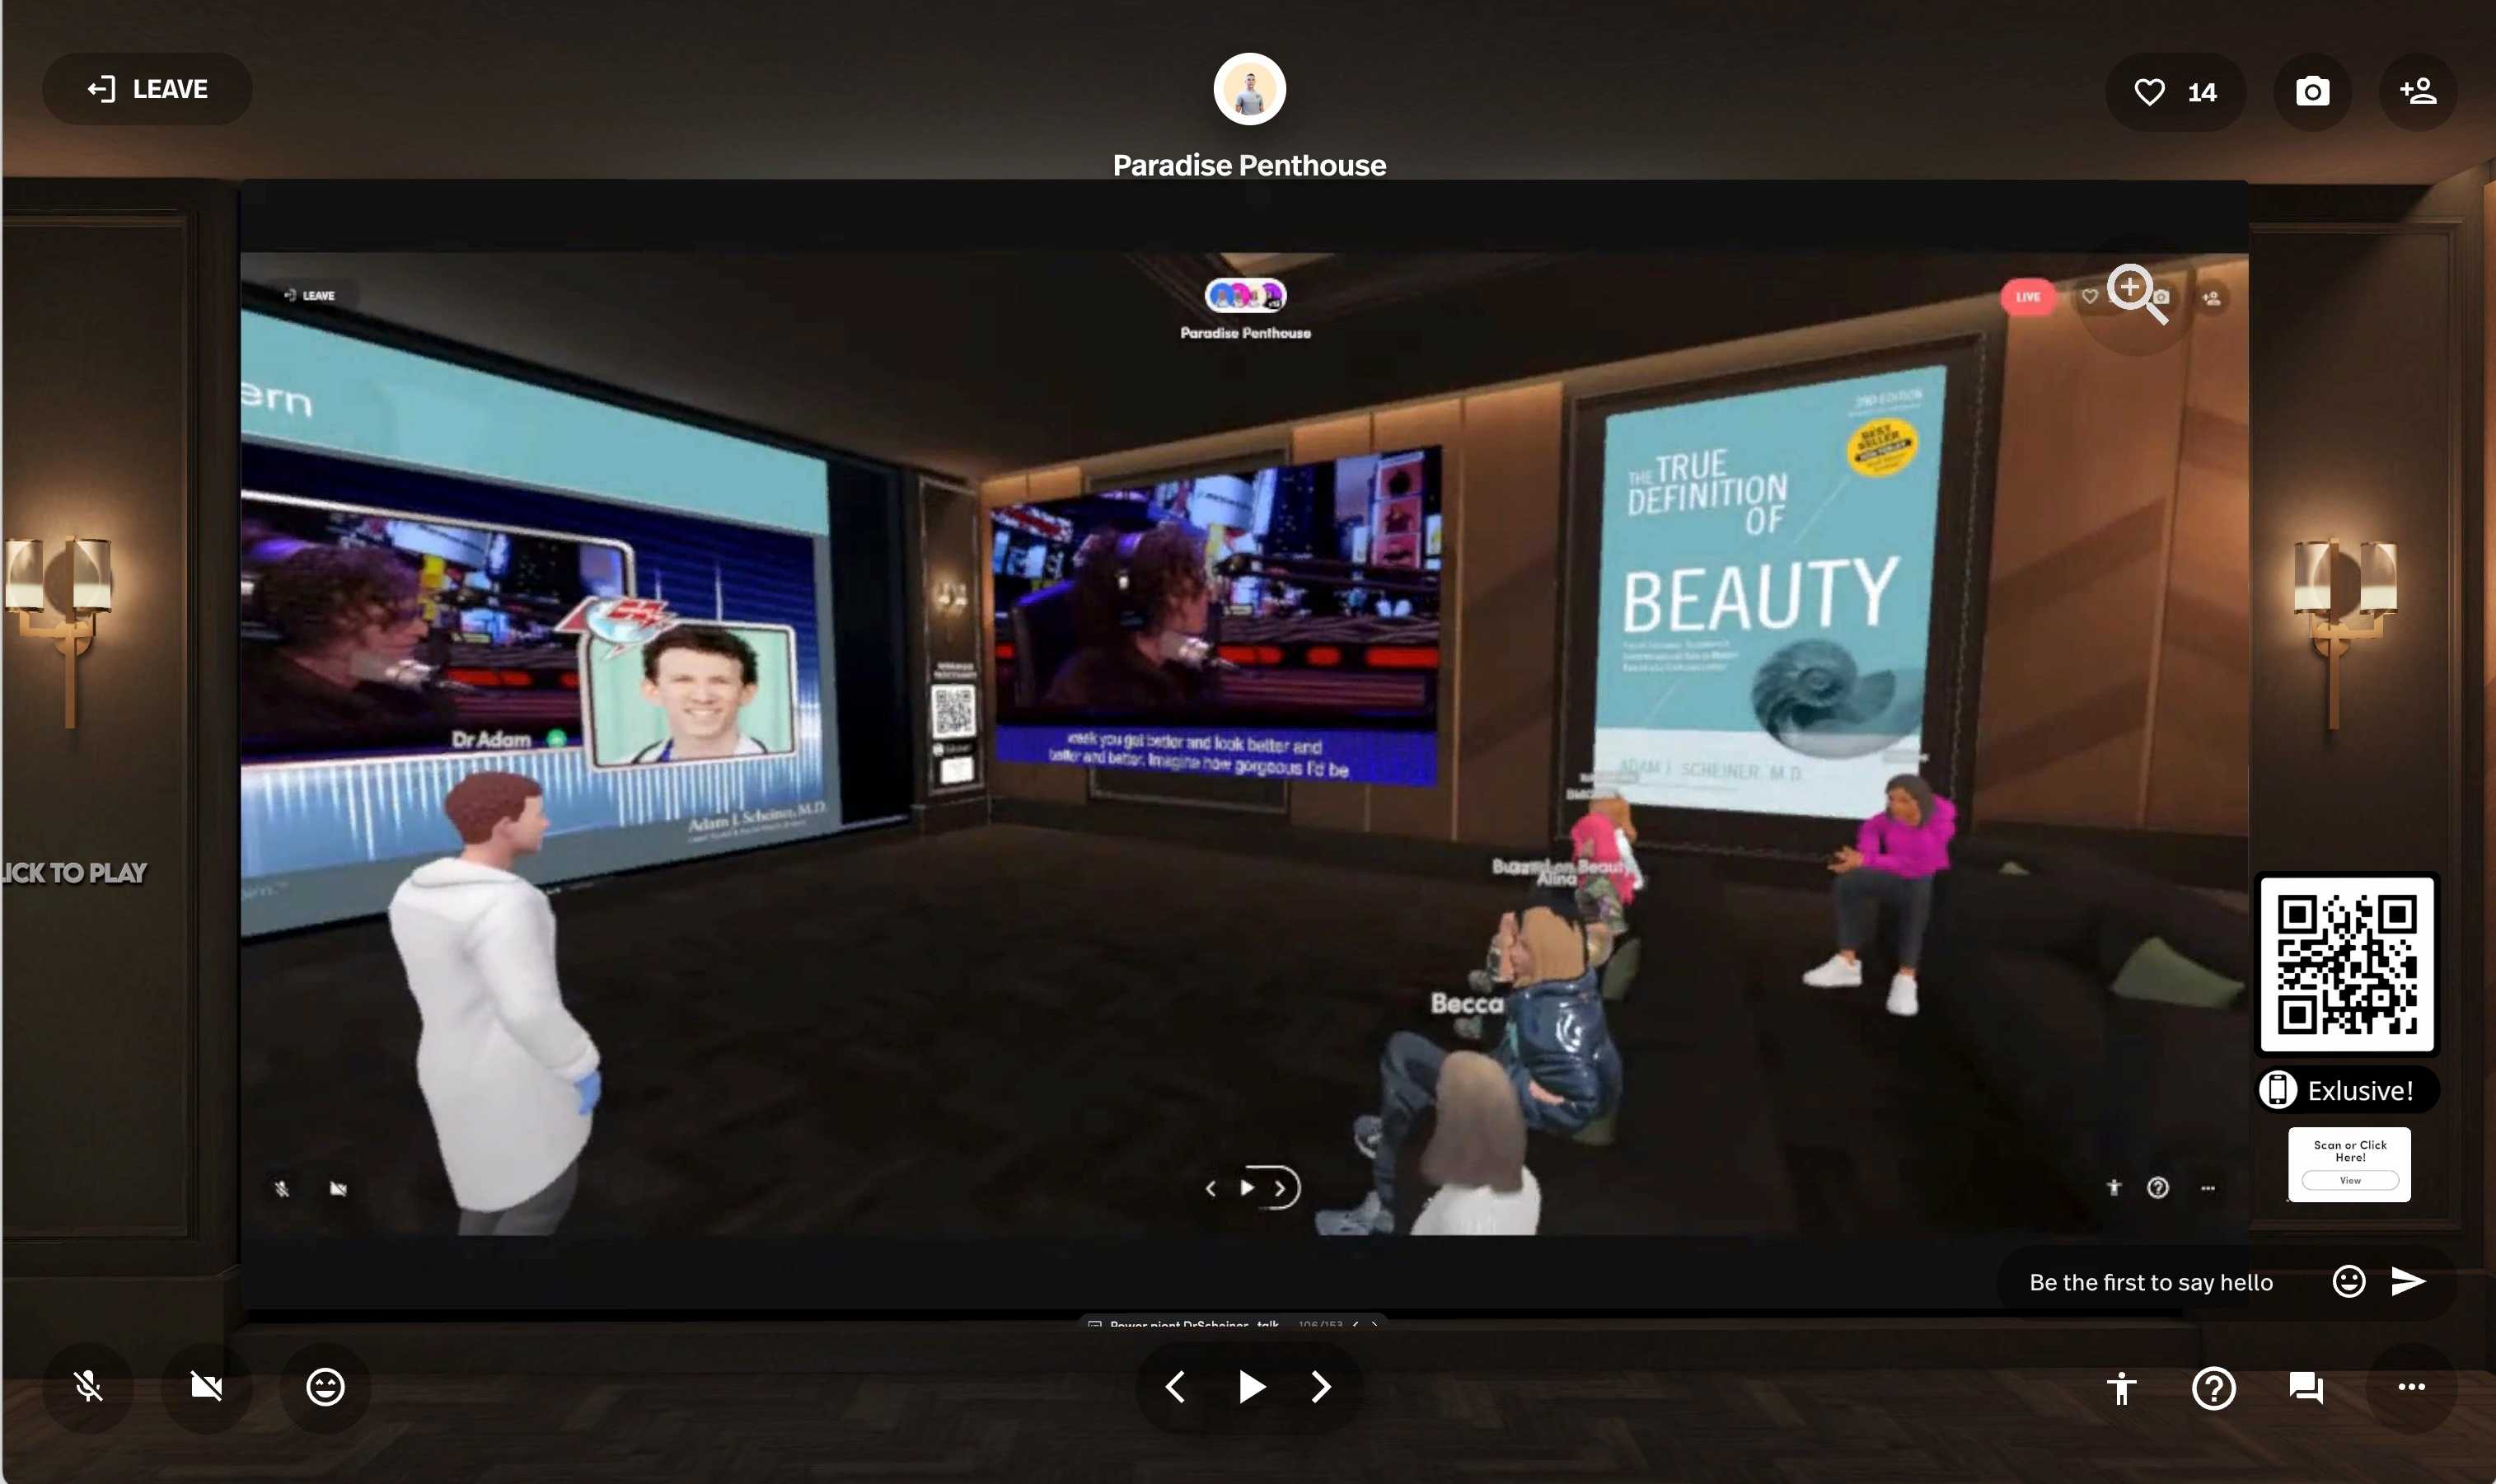 Penthouse lecture in the metaverse.